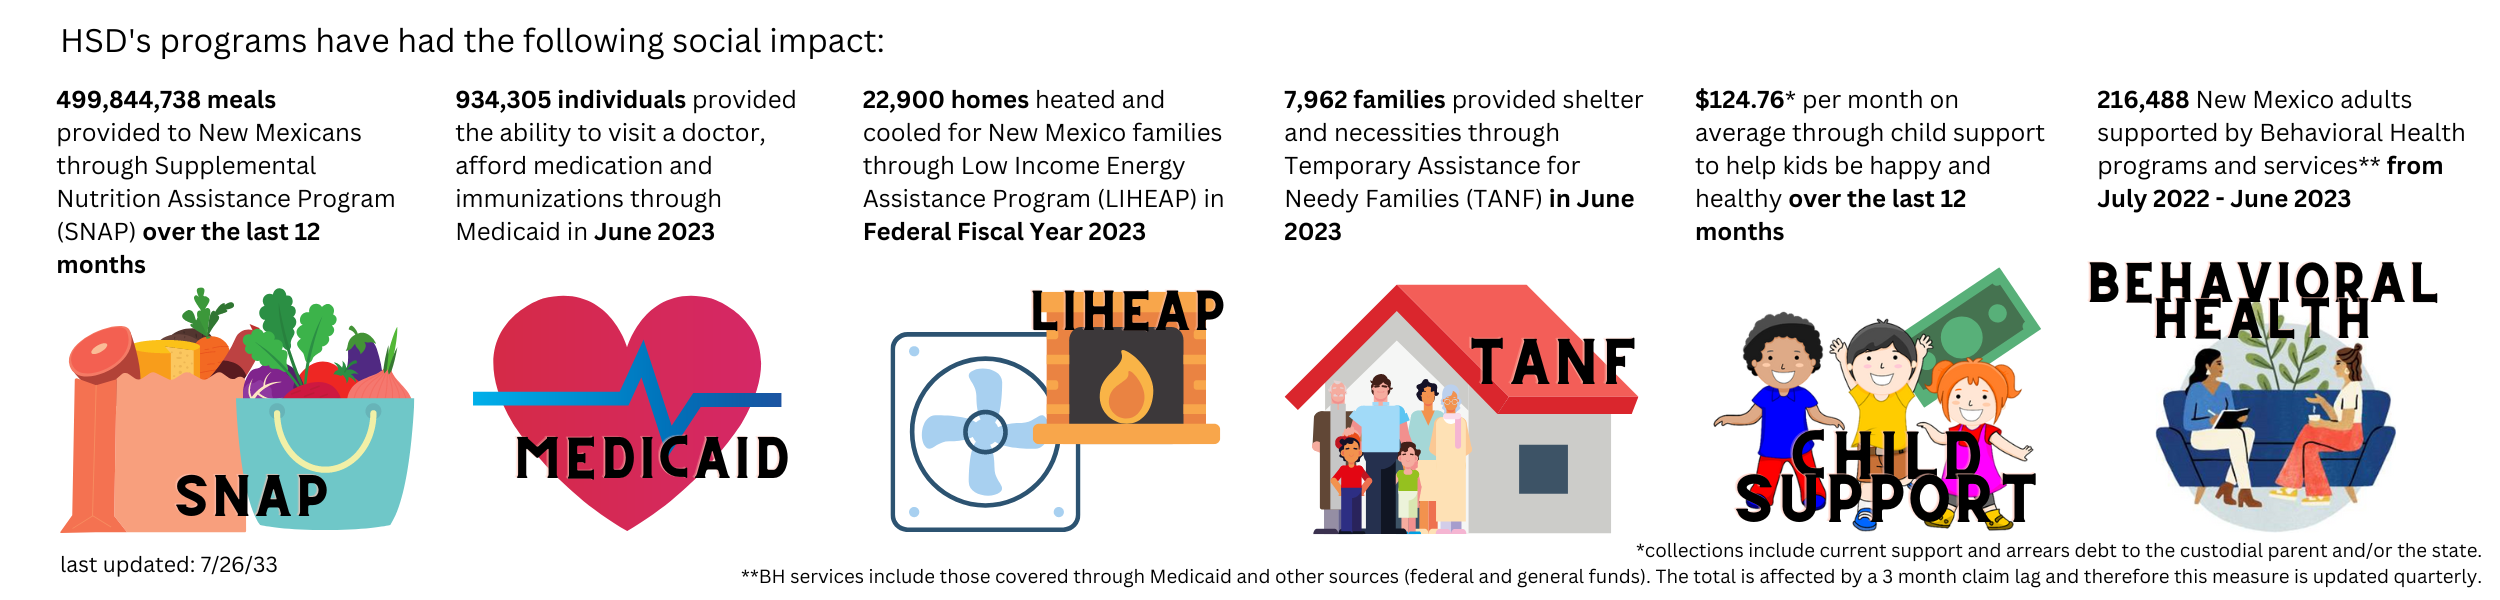 Social impact totals for SNAP, Medicaid, LIHEAP, TANF, Child Support, and Behavioral Health Programs with images representing each program.